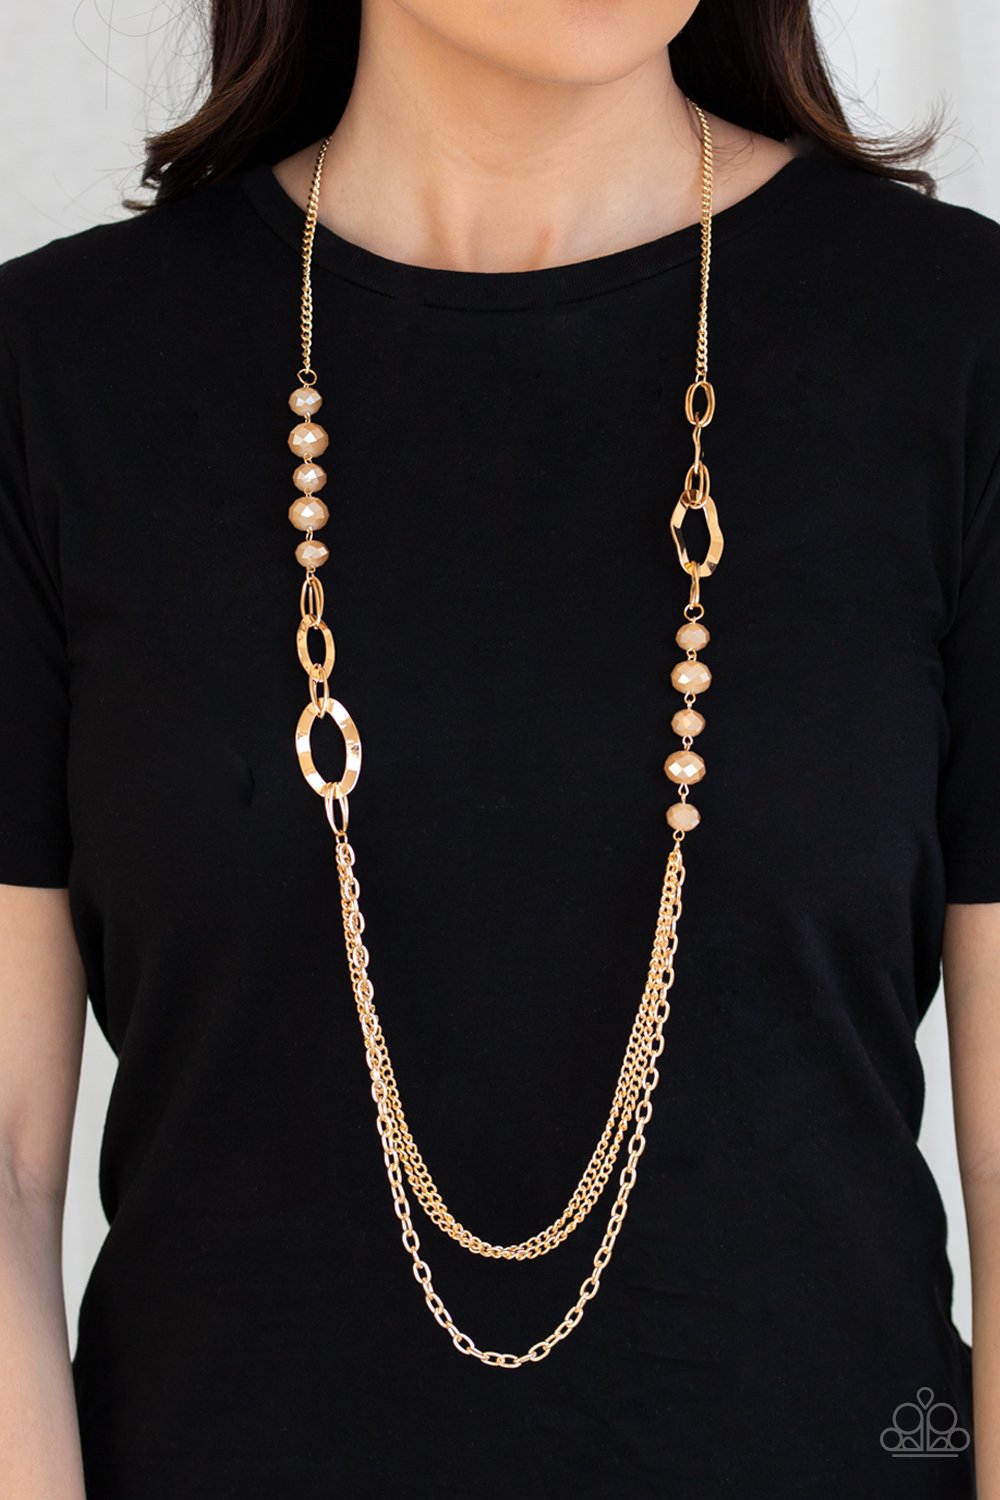 Paparazzi Accessories - Modern Girl Glam - Gold Necklace